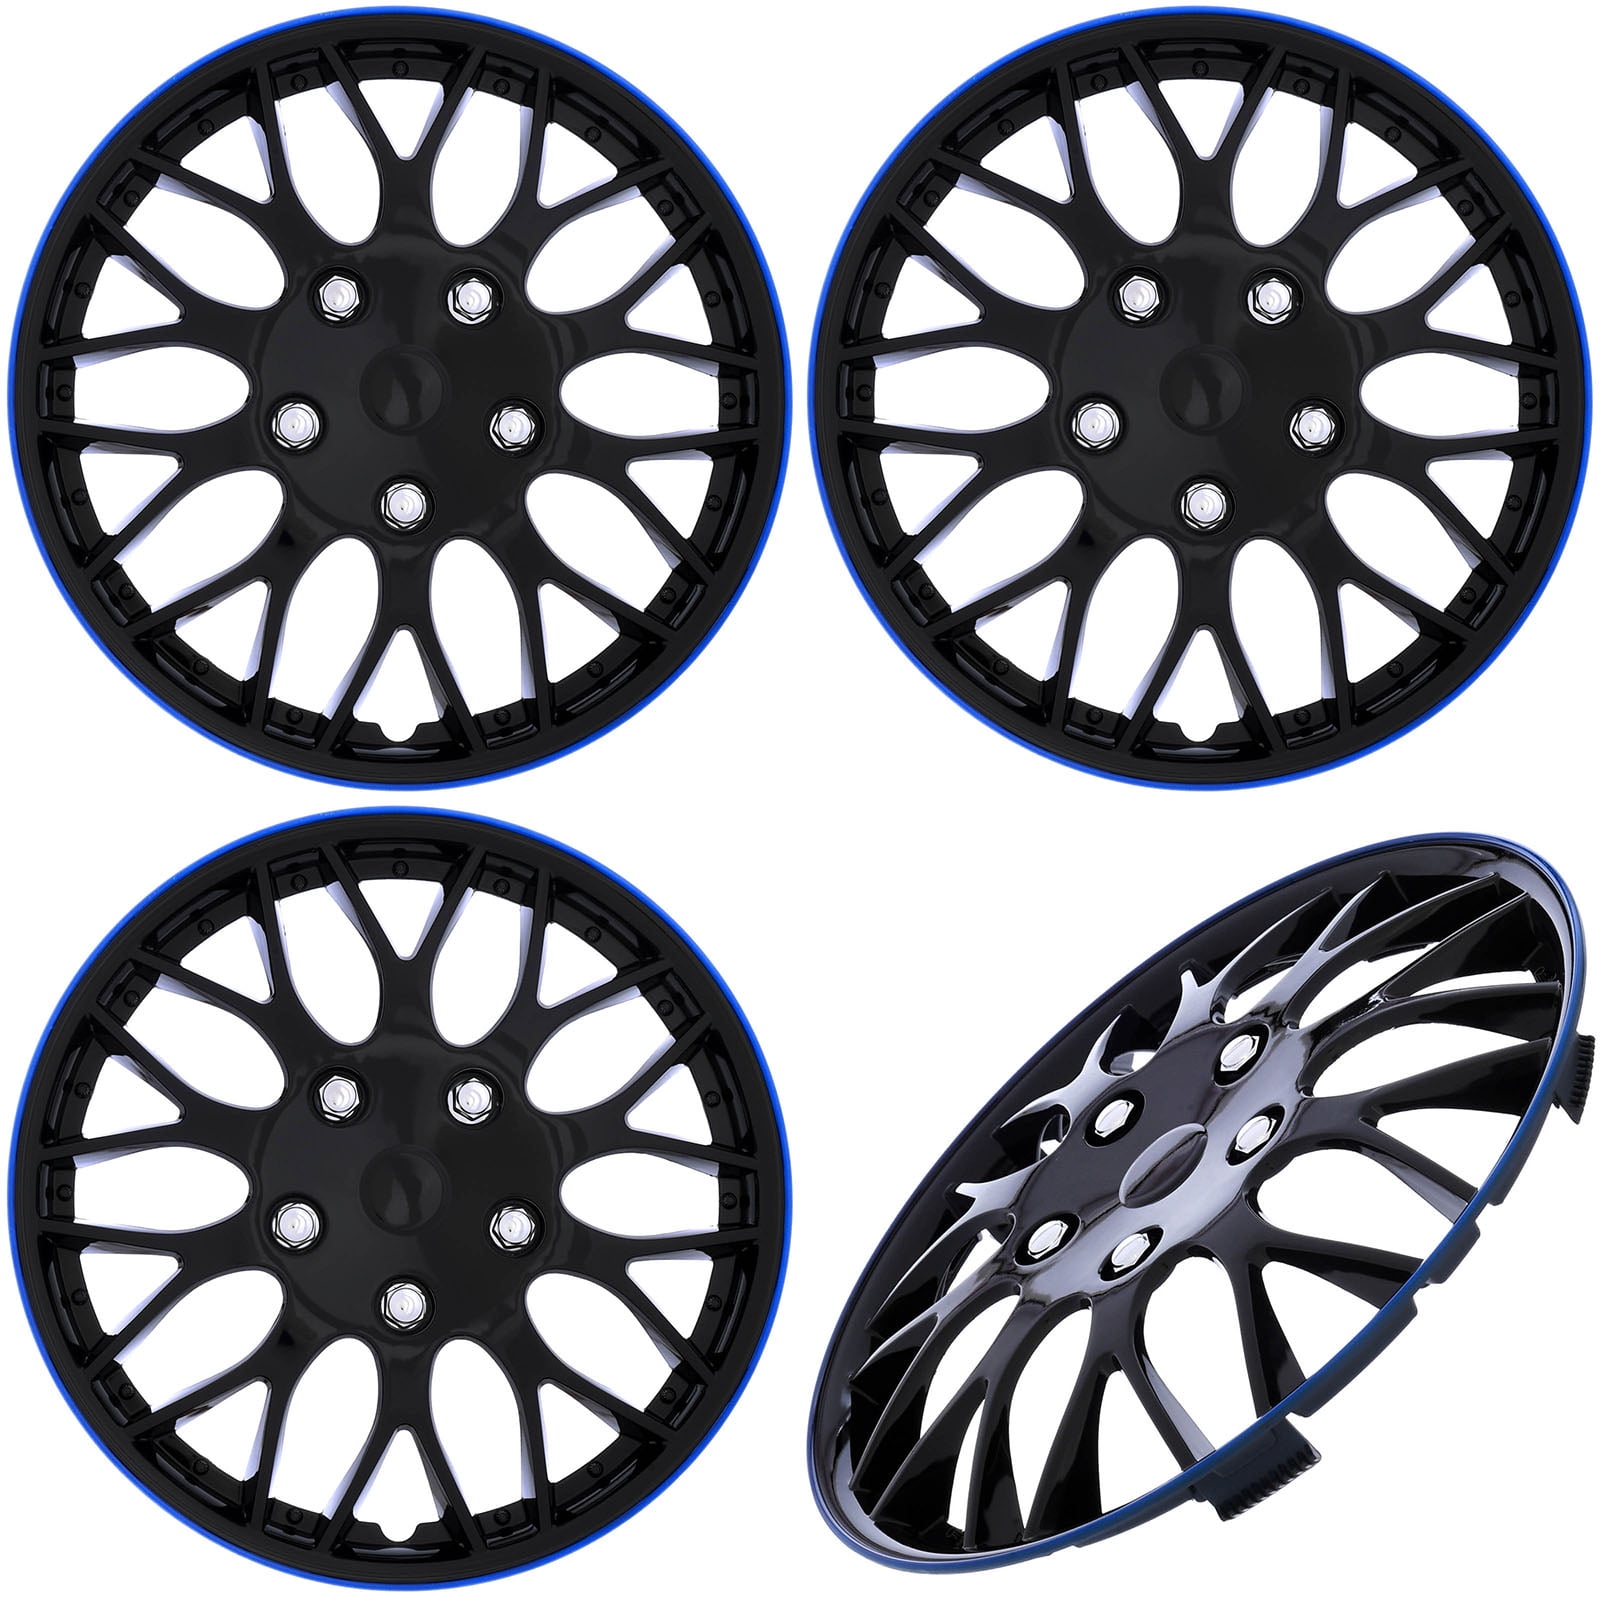 Pack of 4 SPA Hubcaps for Standard Steel Wheels Wheel Covers Fits 14 Inch Wheel, Blue /& Black Snap On